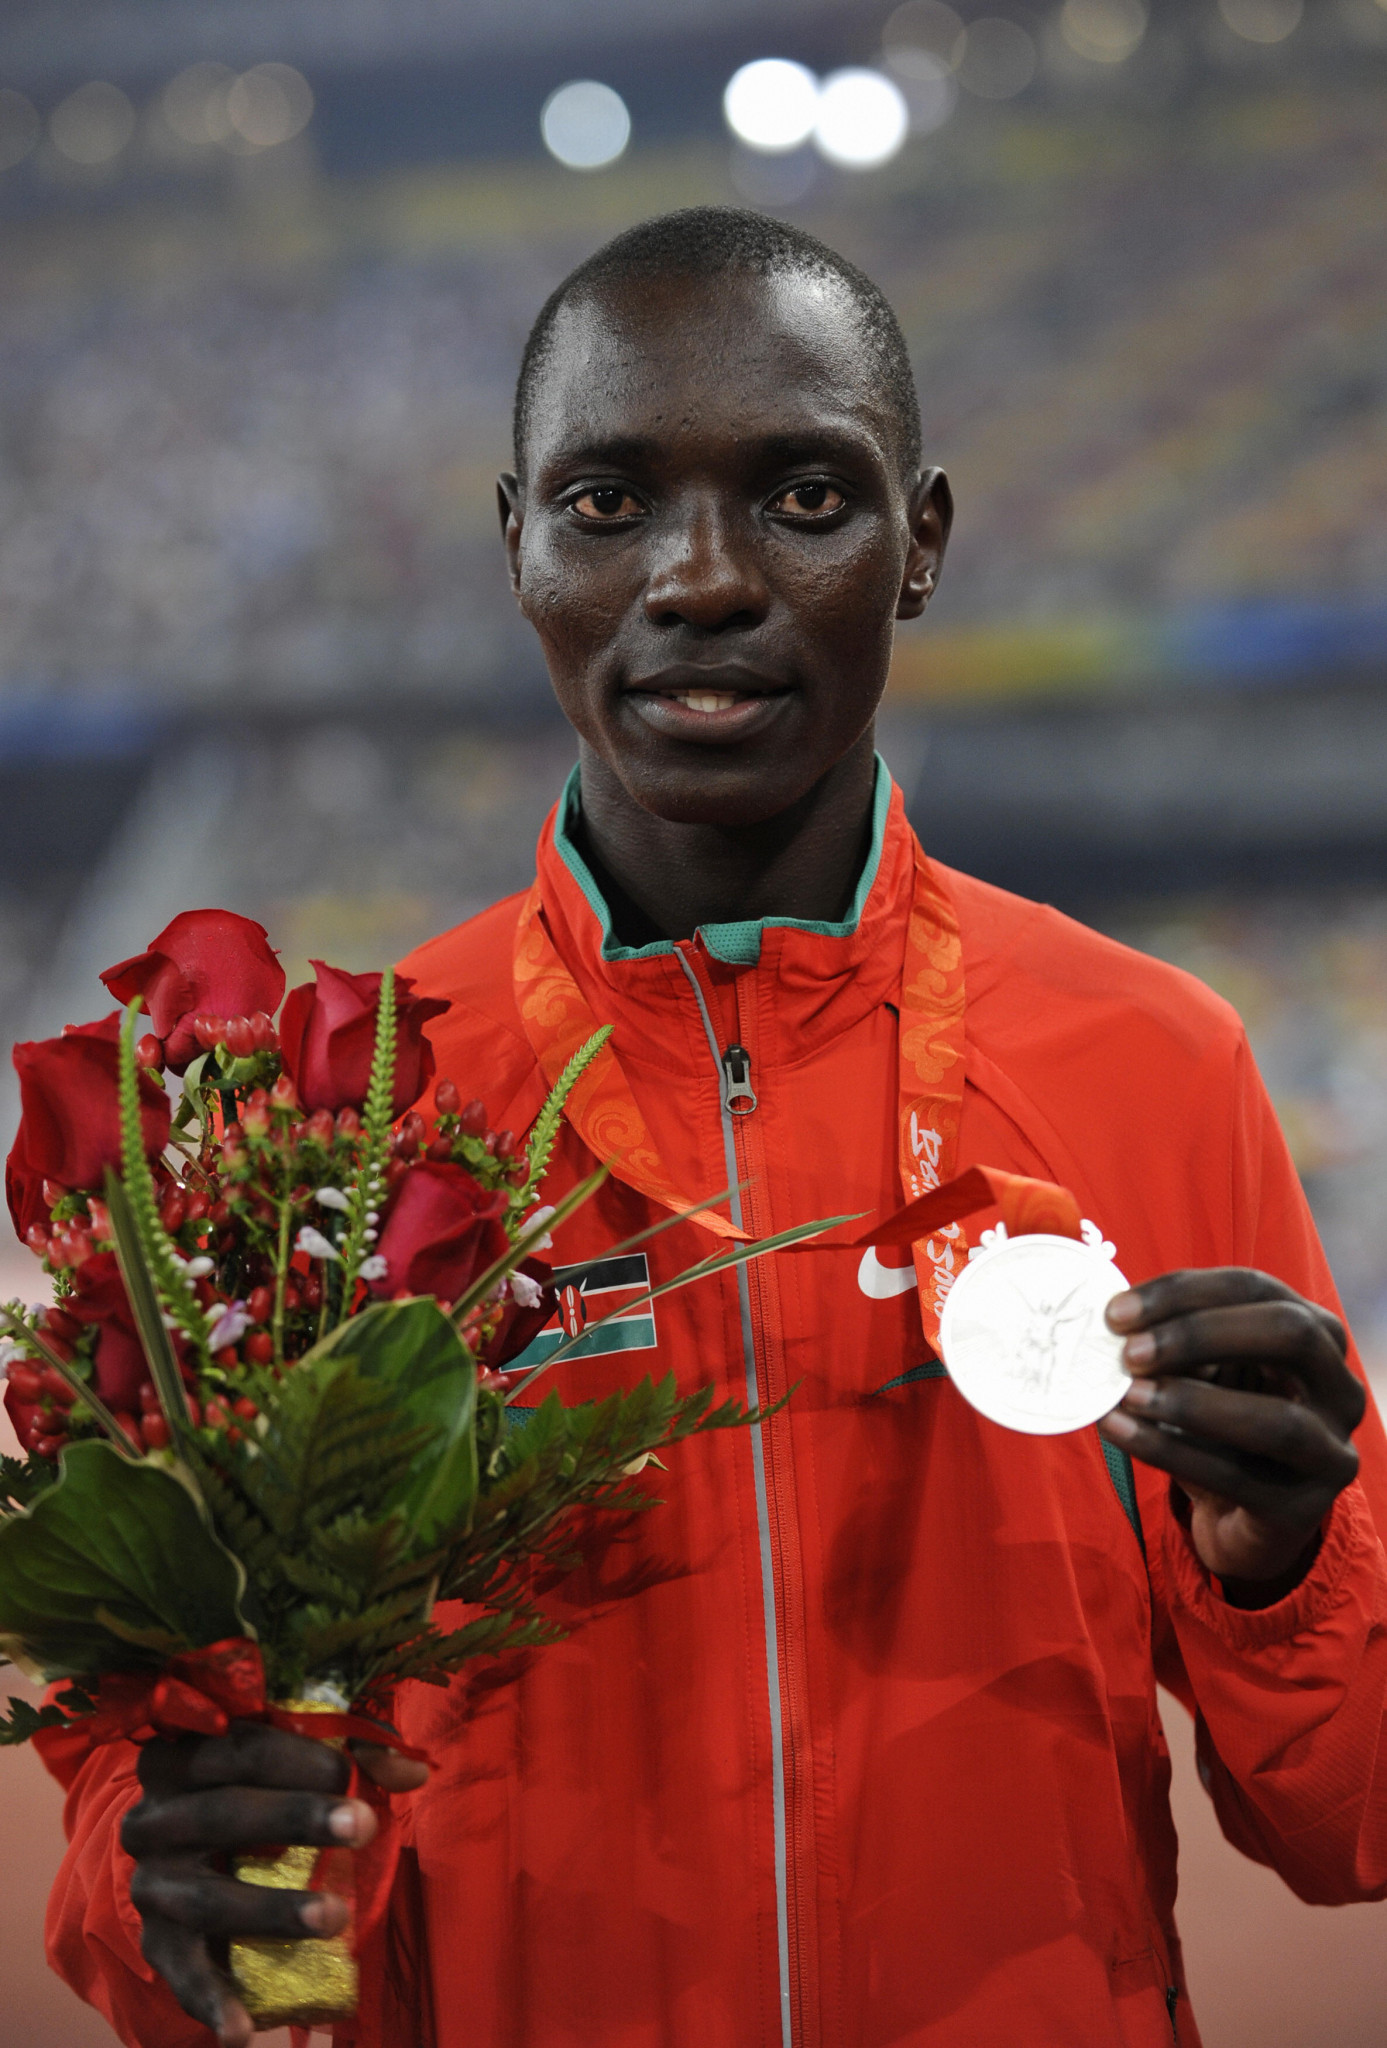 Asbel Kiprop initially won silver at Beijing 2008 but was subsequently upgraded to gold after Bahrain's Rashid Ramzi failed a drugs test ©Getty Images